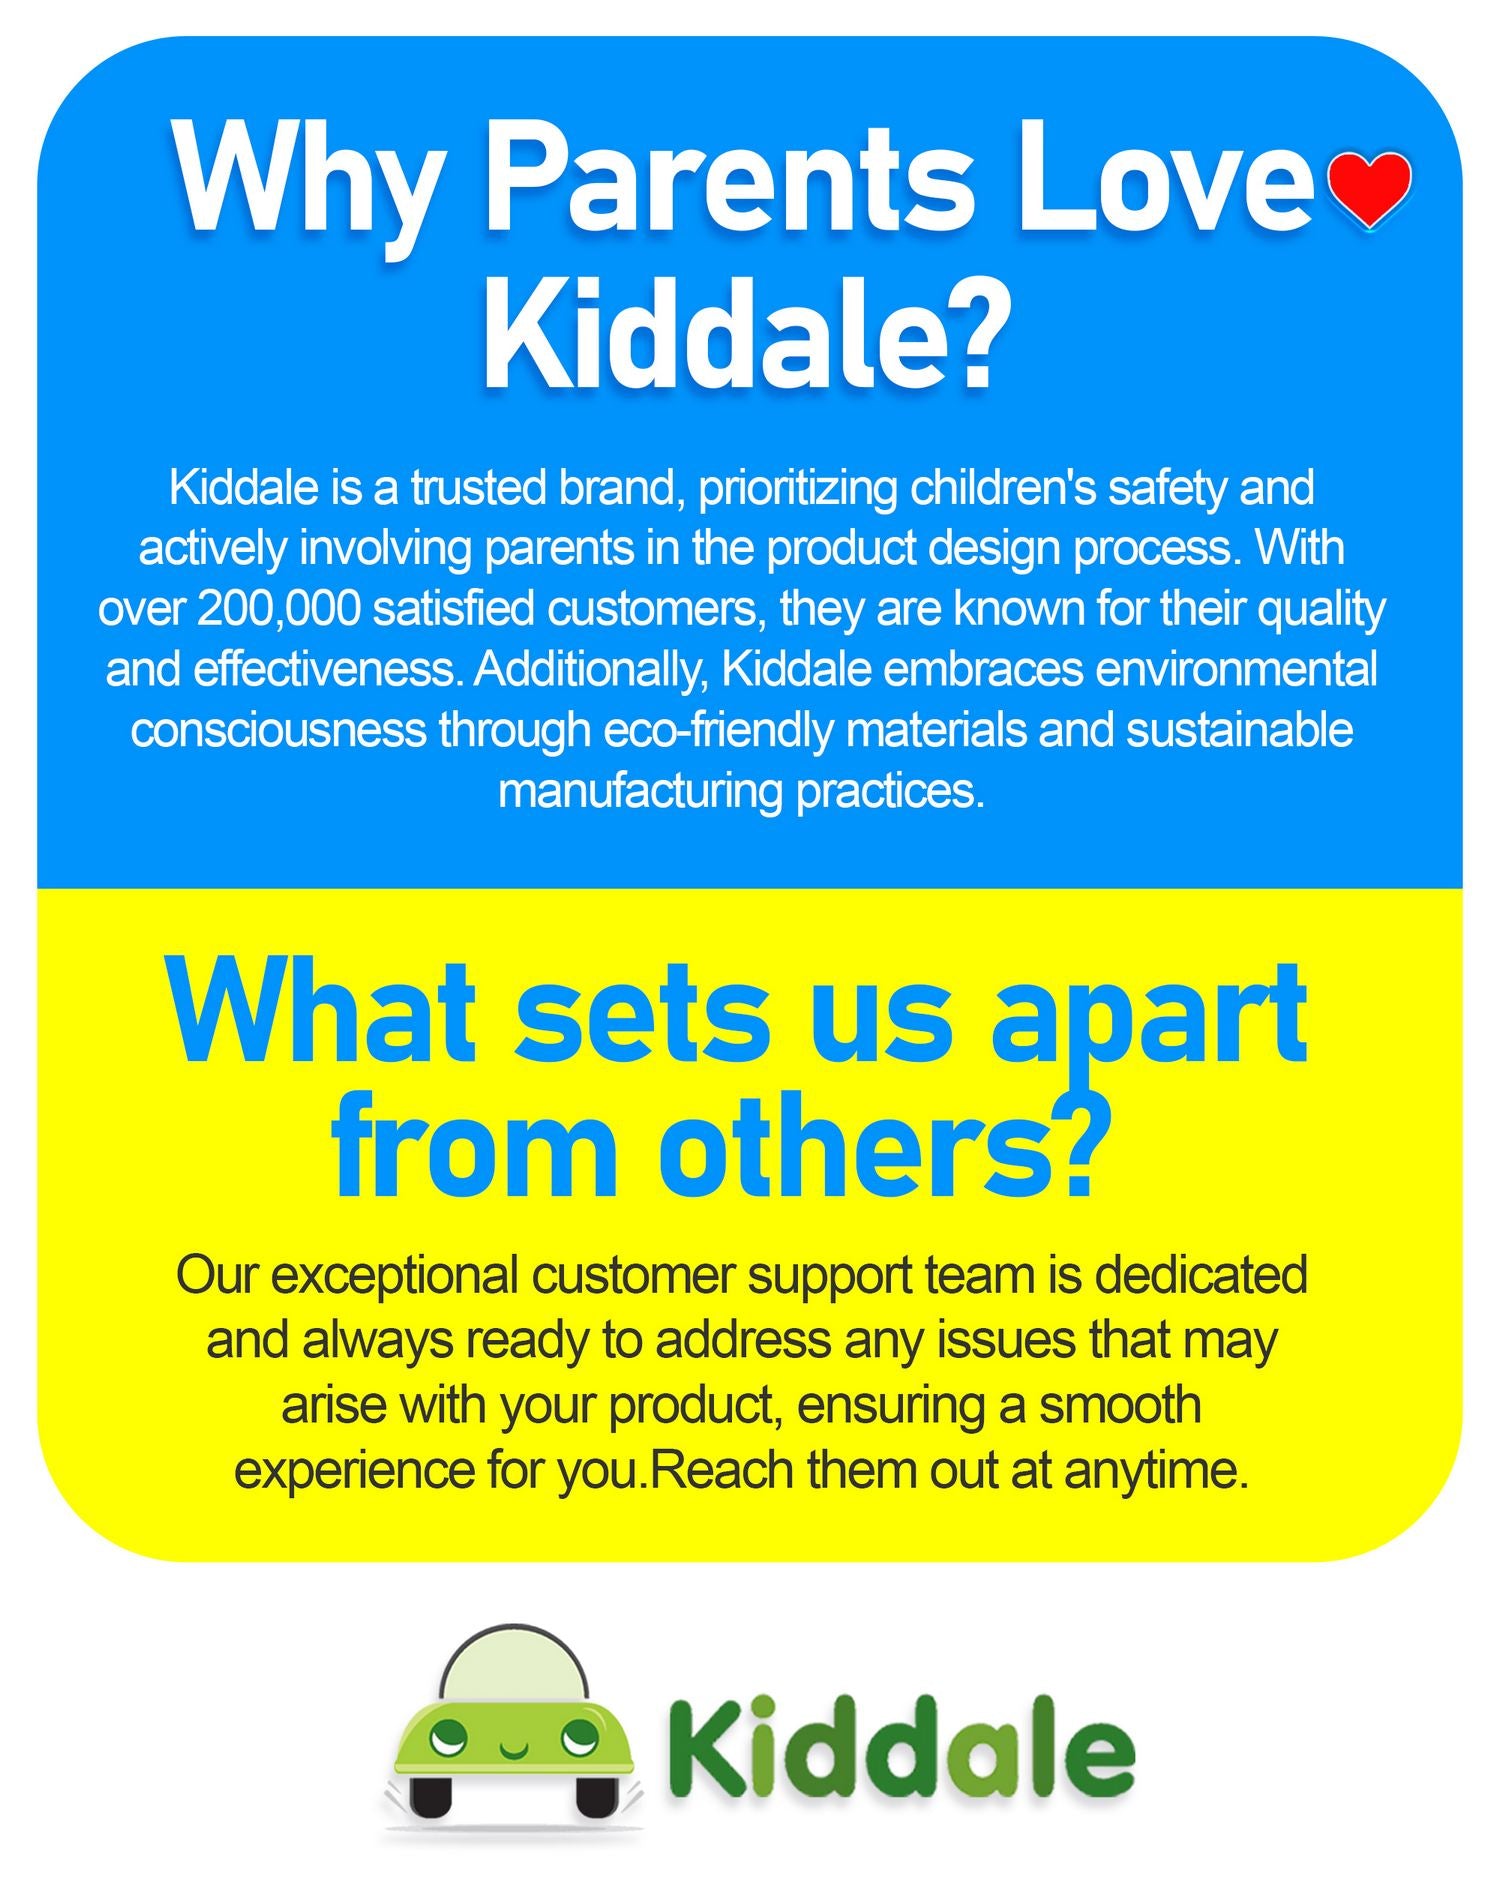 Kiddale is committed to providing parents with innovative solutions that support their child's developmental journey